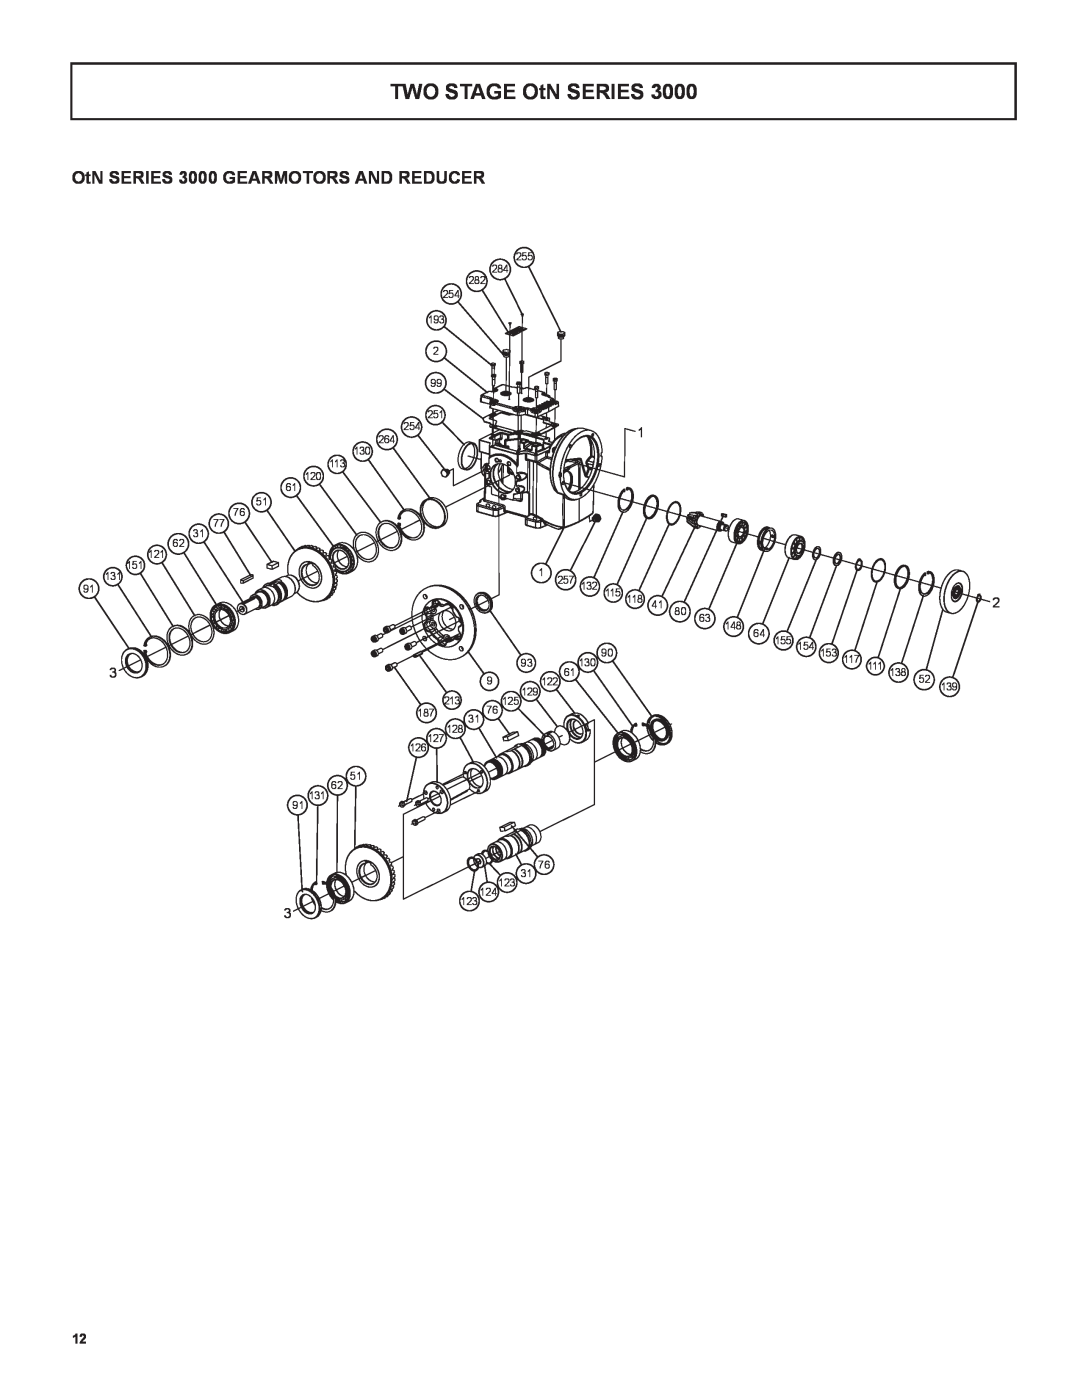 Emerson installation instructions TWO STAGE OtN SERIES, OtN SERIES 3000 GEARMOTORS AND REDUCER 